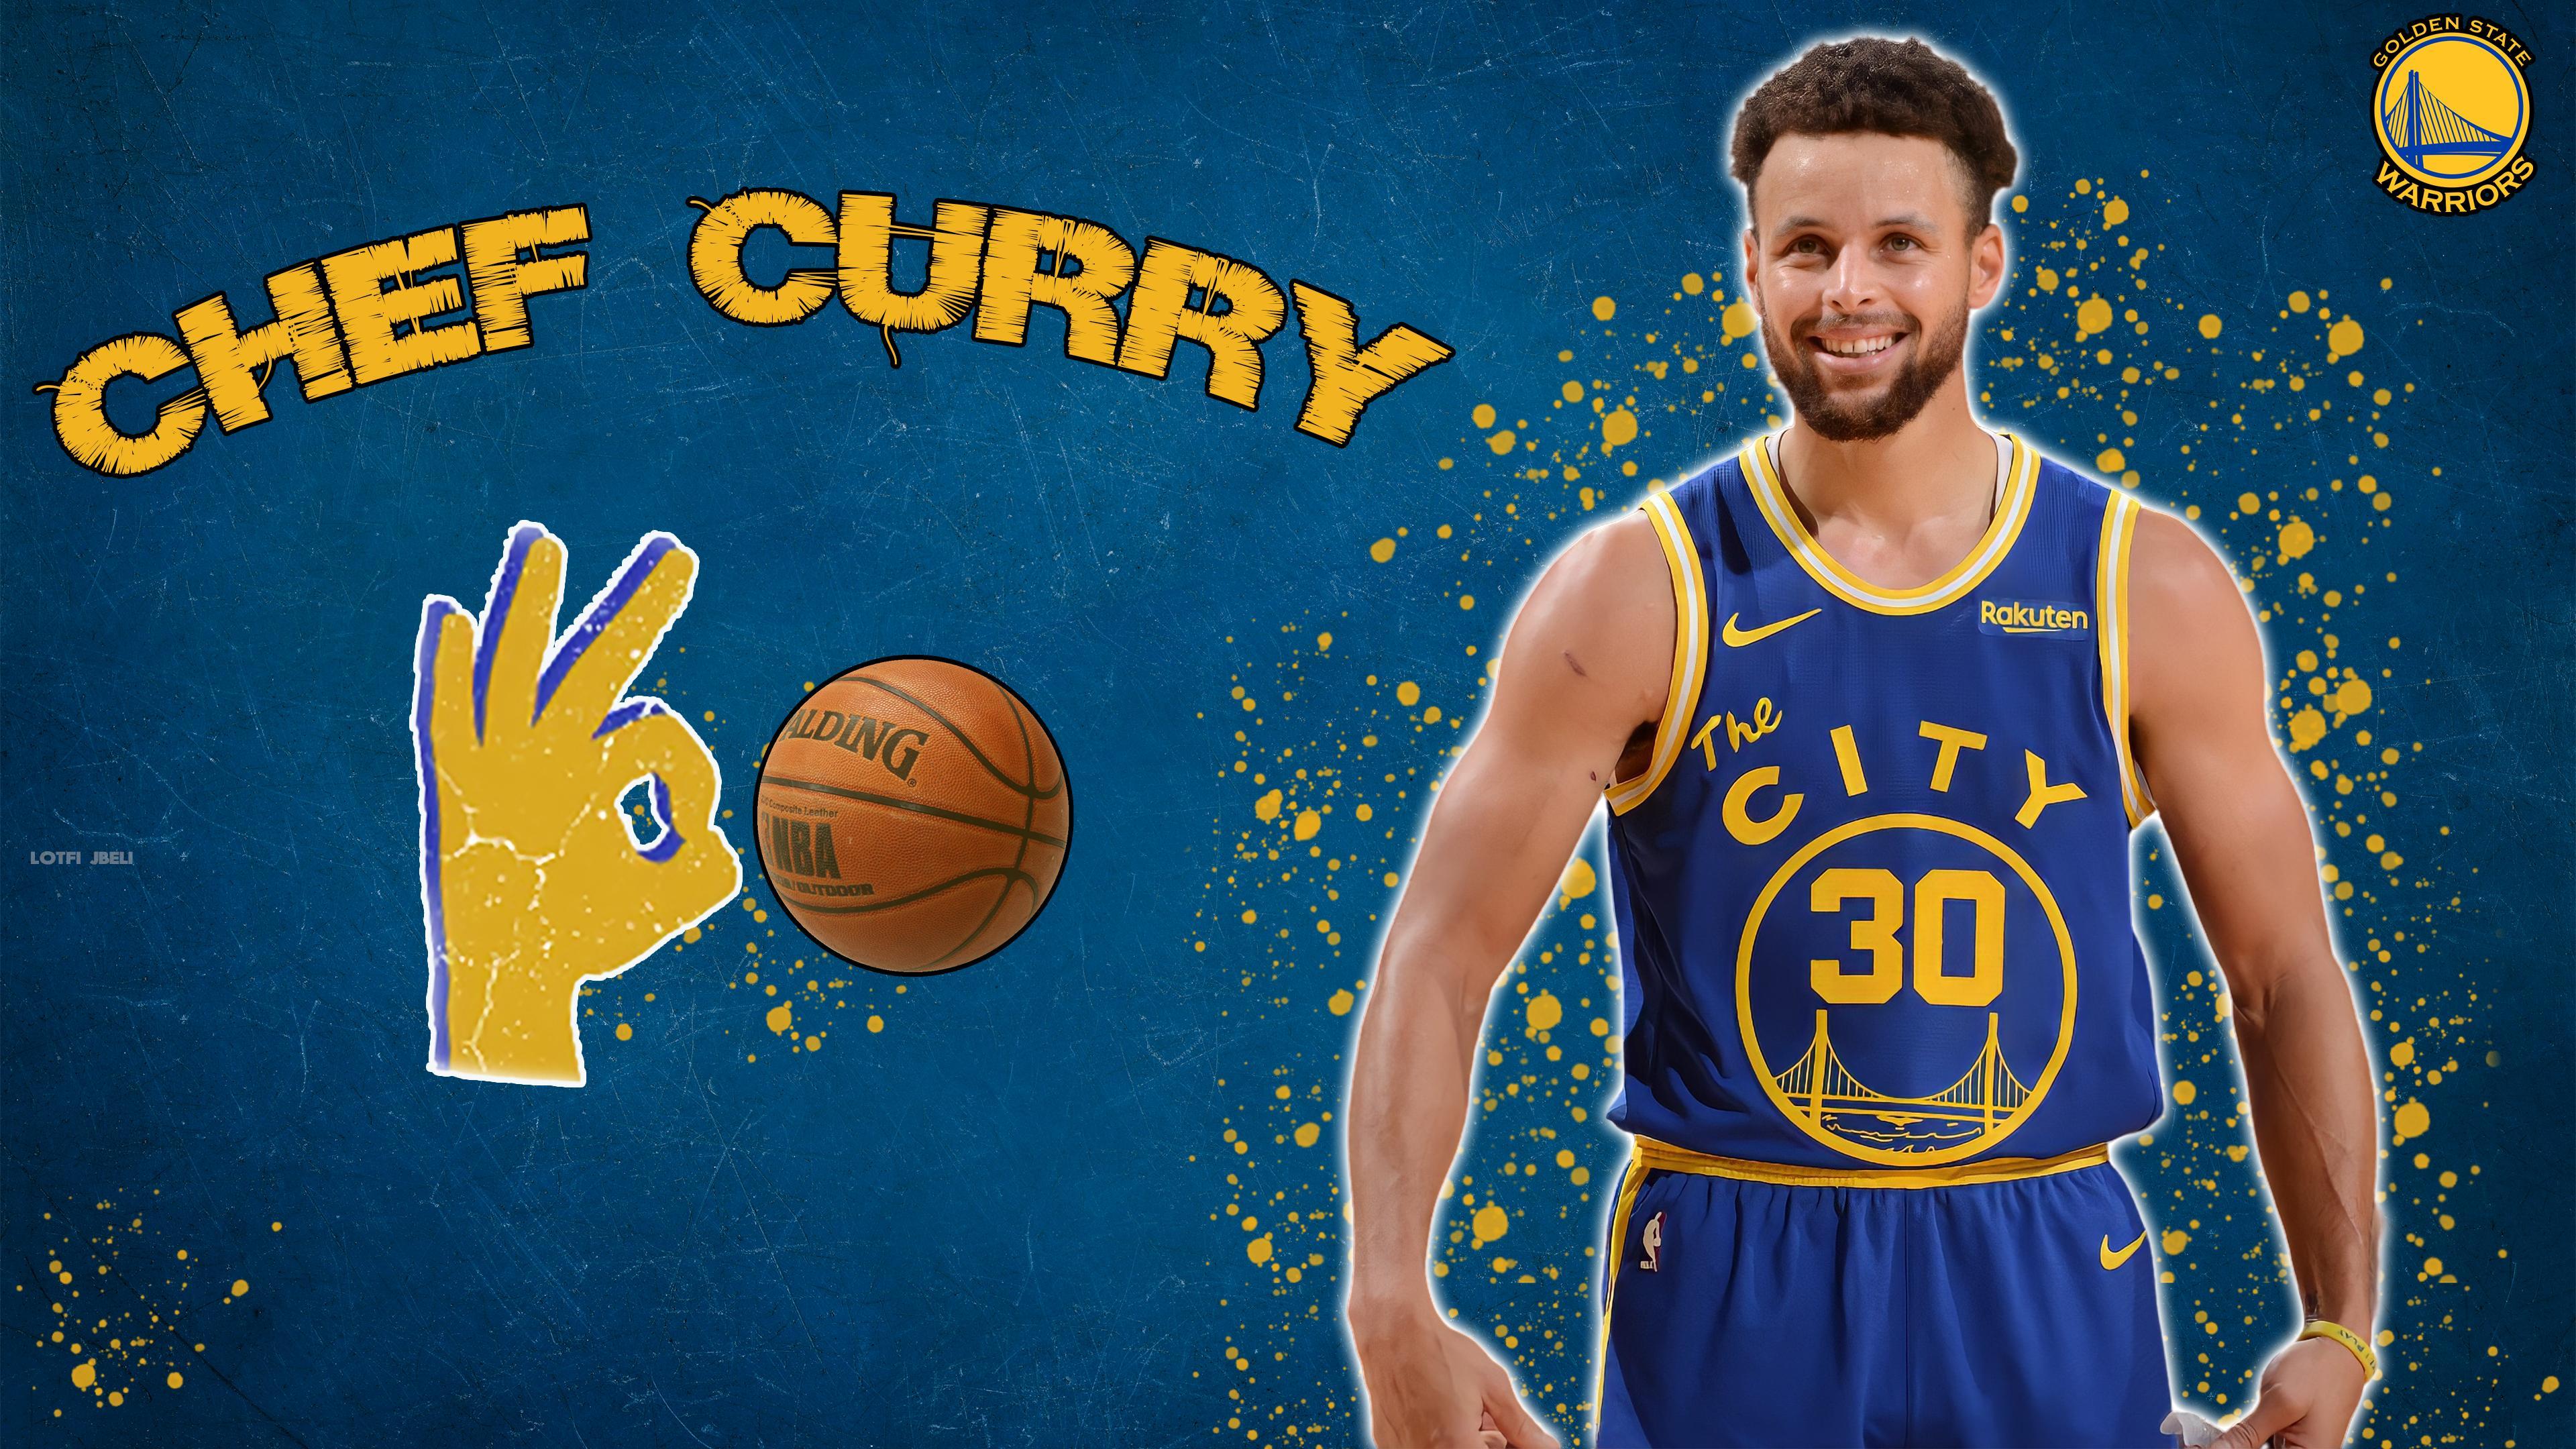 Download wallpapers 4k Stephen Curry 2020 NBA Golden State Warriors  basketball stars Steph Curry blue neon lights Stephen Curry Golden State  Warriors basketball Stephen Curry 4K for desktop free Pictures for  desktop